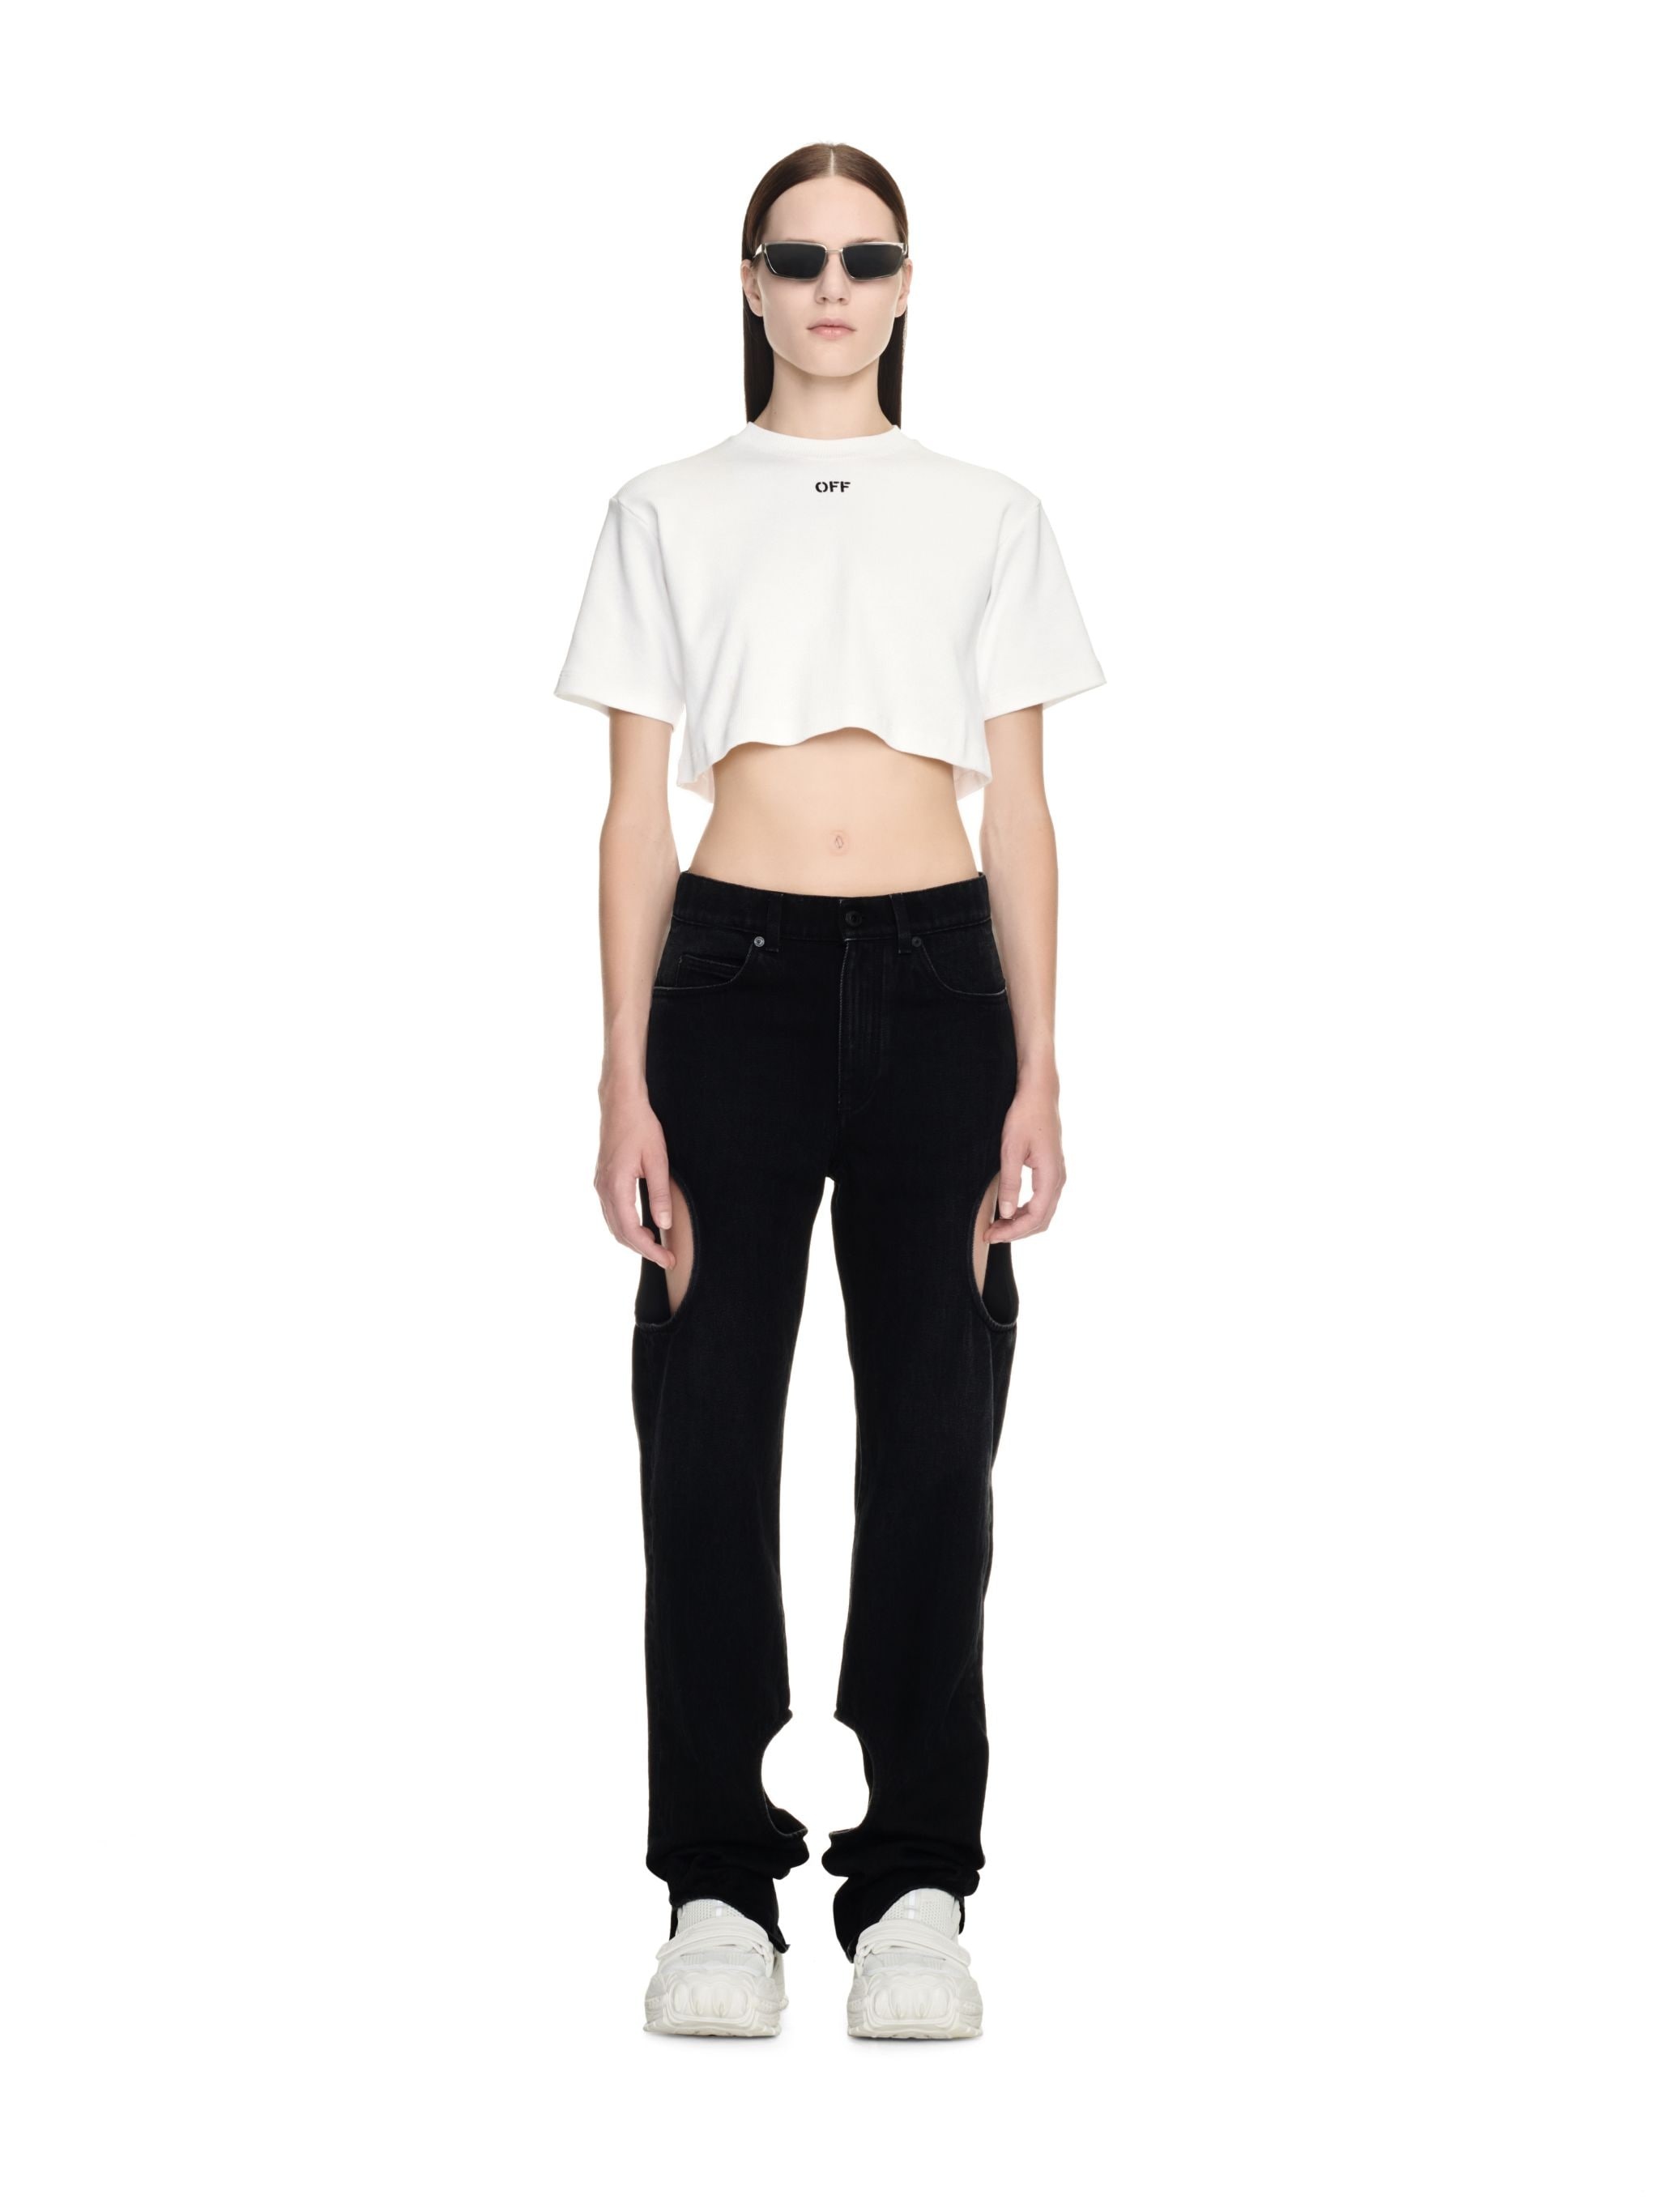 Off Stamp Rib Cropped Tee - 2